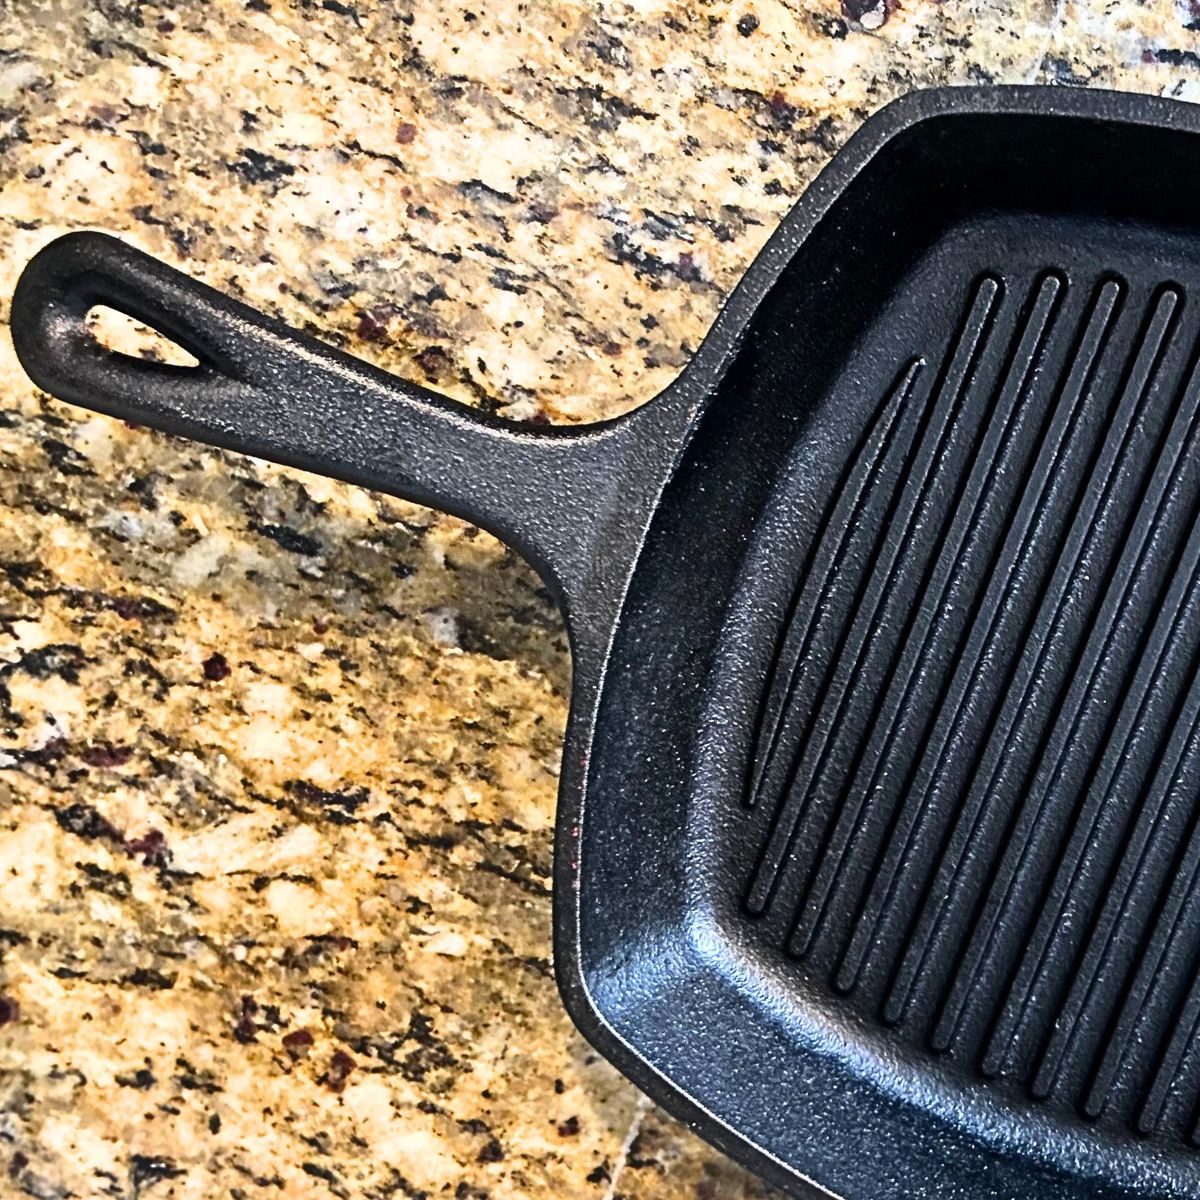 How to Properly Reseason and Restore Your Cast Iron Pan